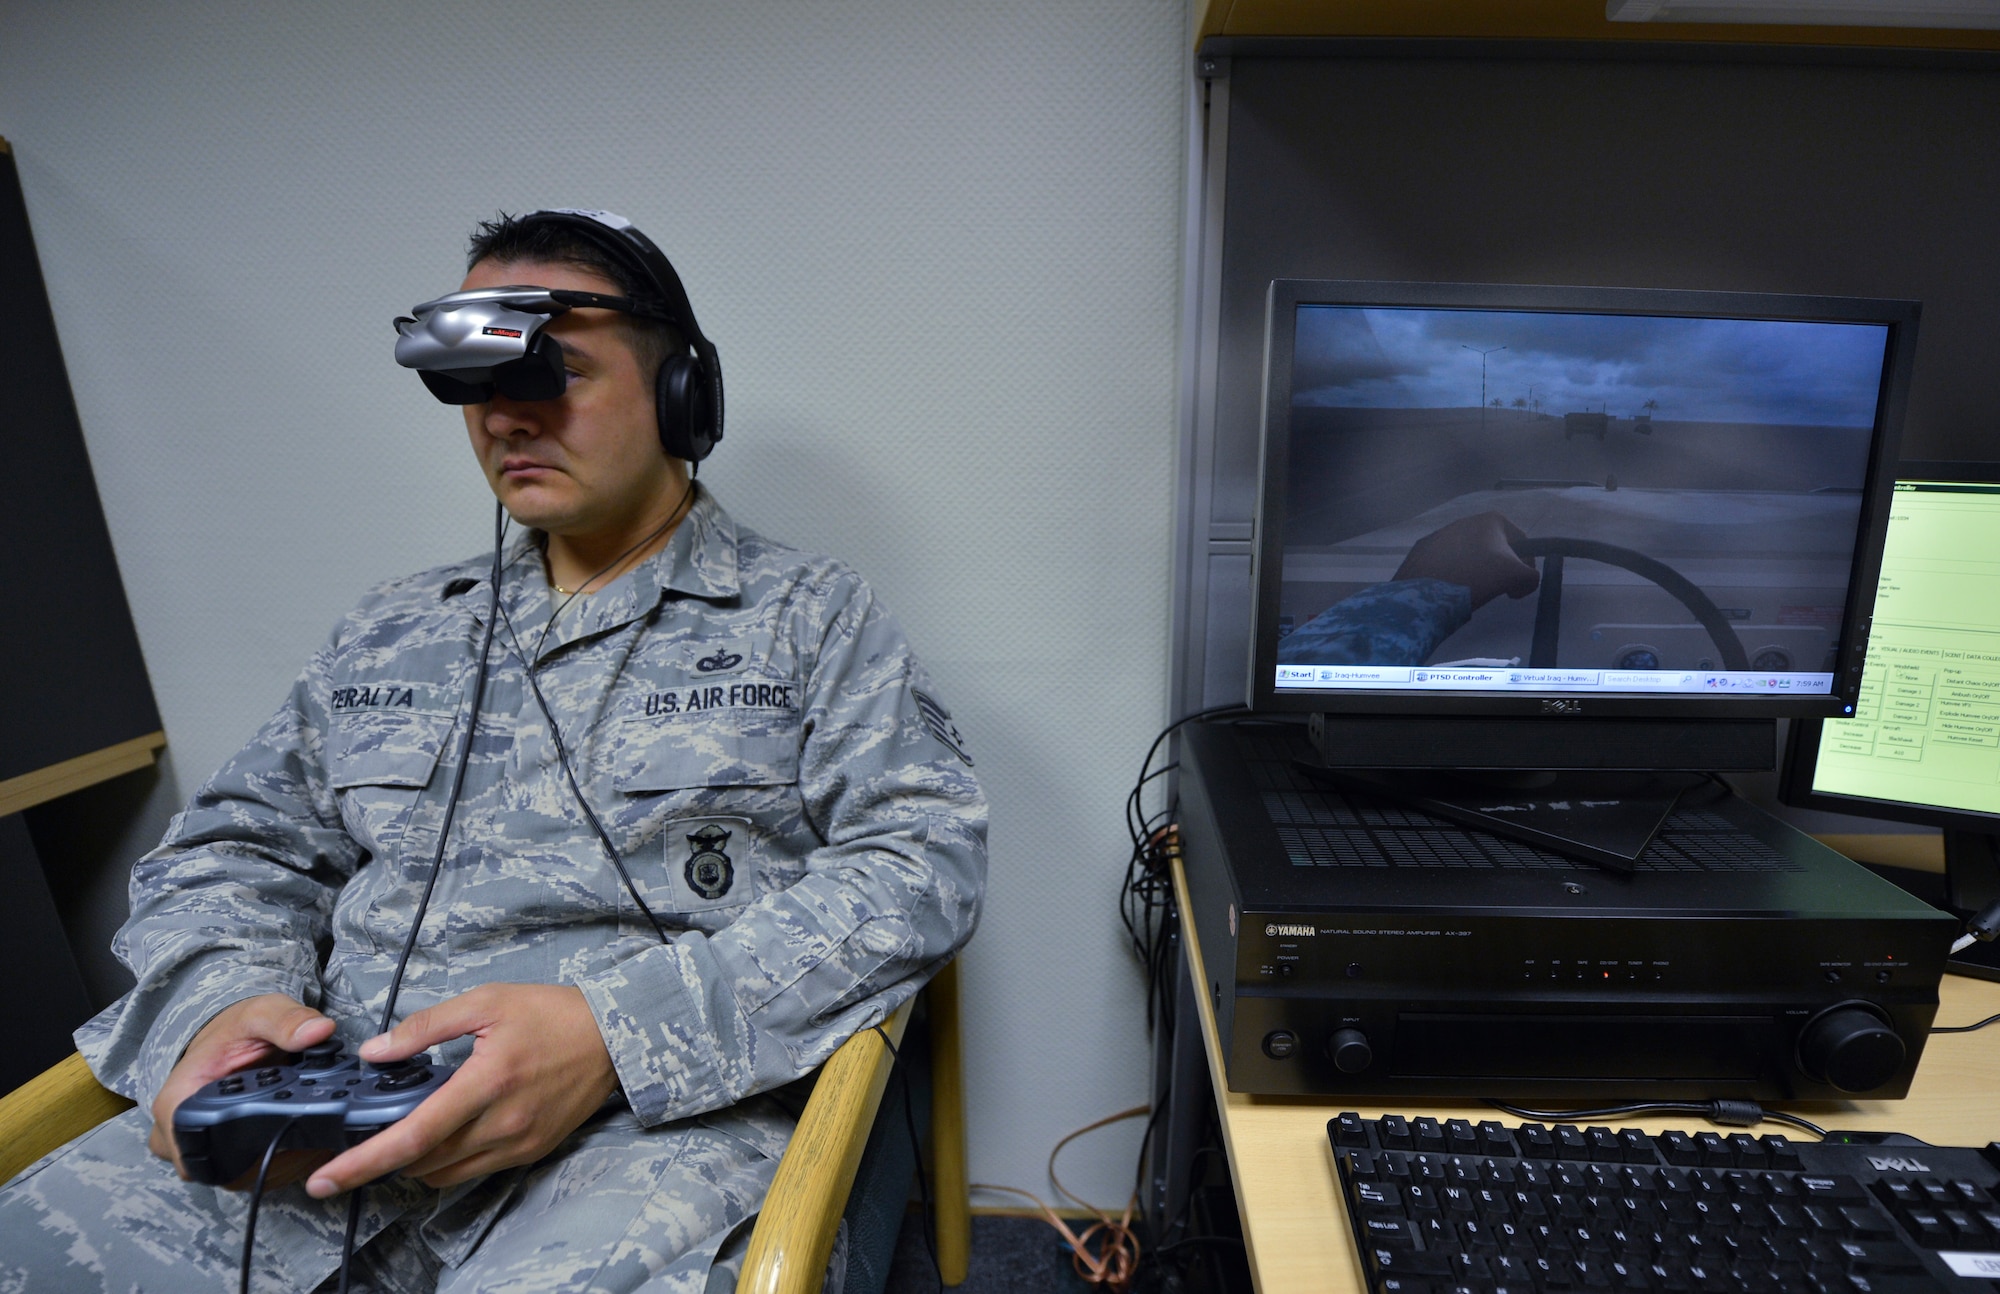 Staff Sgt. Louie Peralta, 86th Security Forces Squadron operations controller, utilizes a virtual reality trainer, Aug. 8, 2013, Ramstein Air Base, Germany. The 86th Medical Group offers virtual reality therapy in conjunction with traditional therapy to treat post-traumatic stress disorder. (U.S. Air Force photo/Airman 1st Class Jordan Castelan)